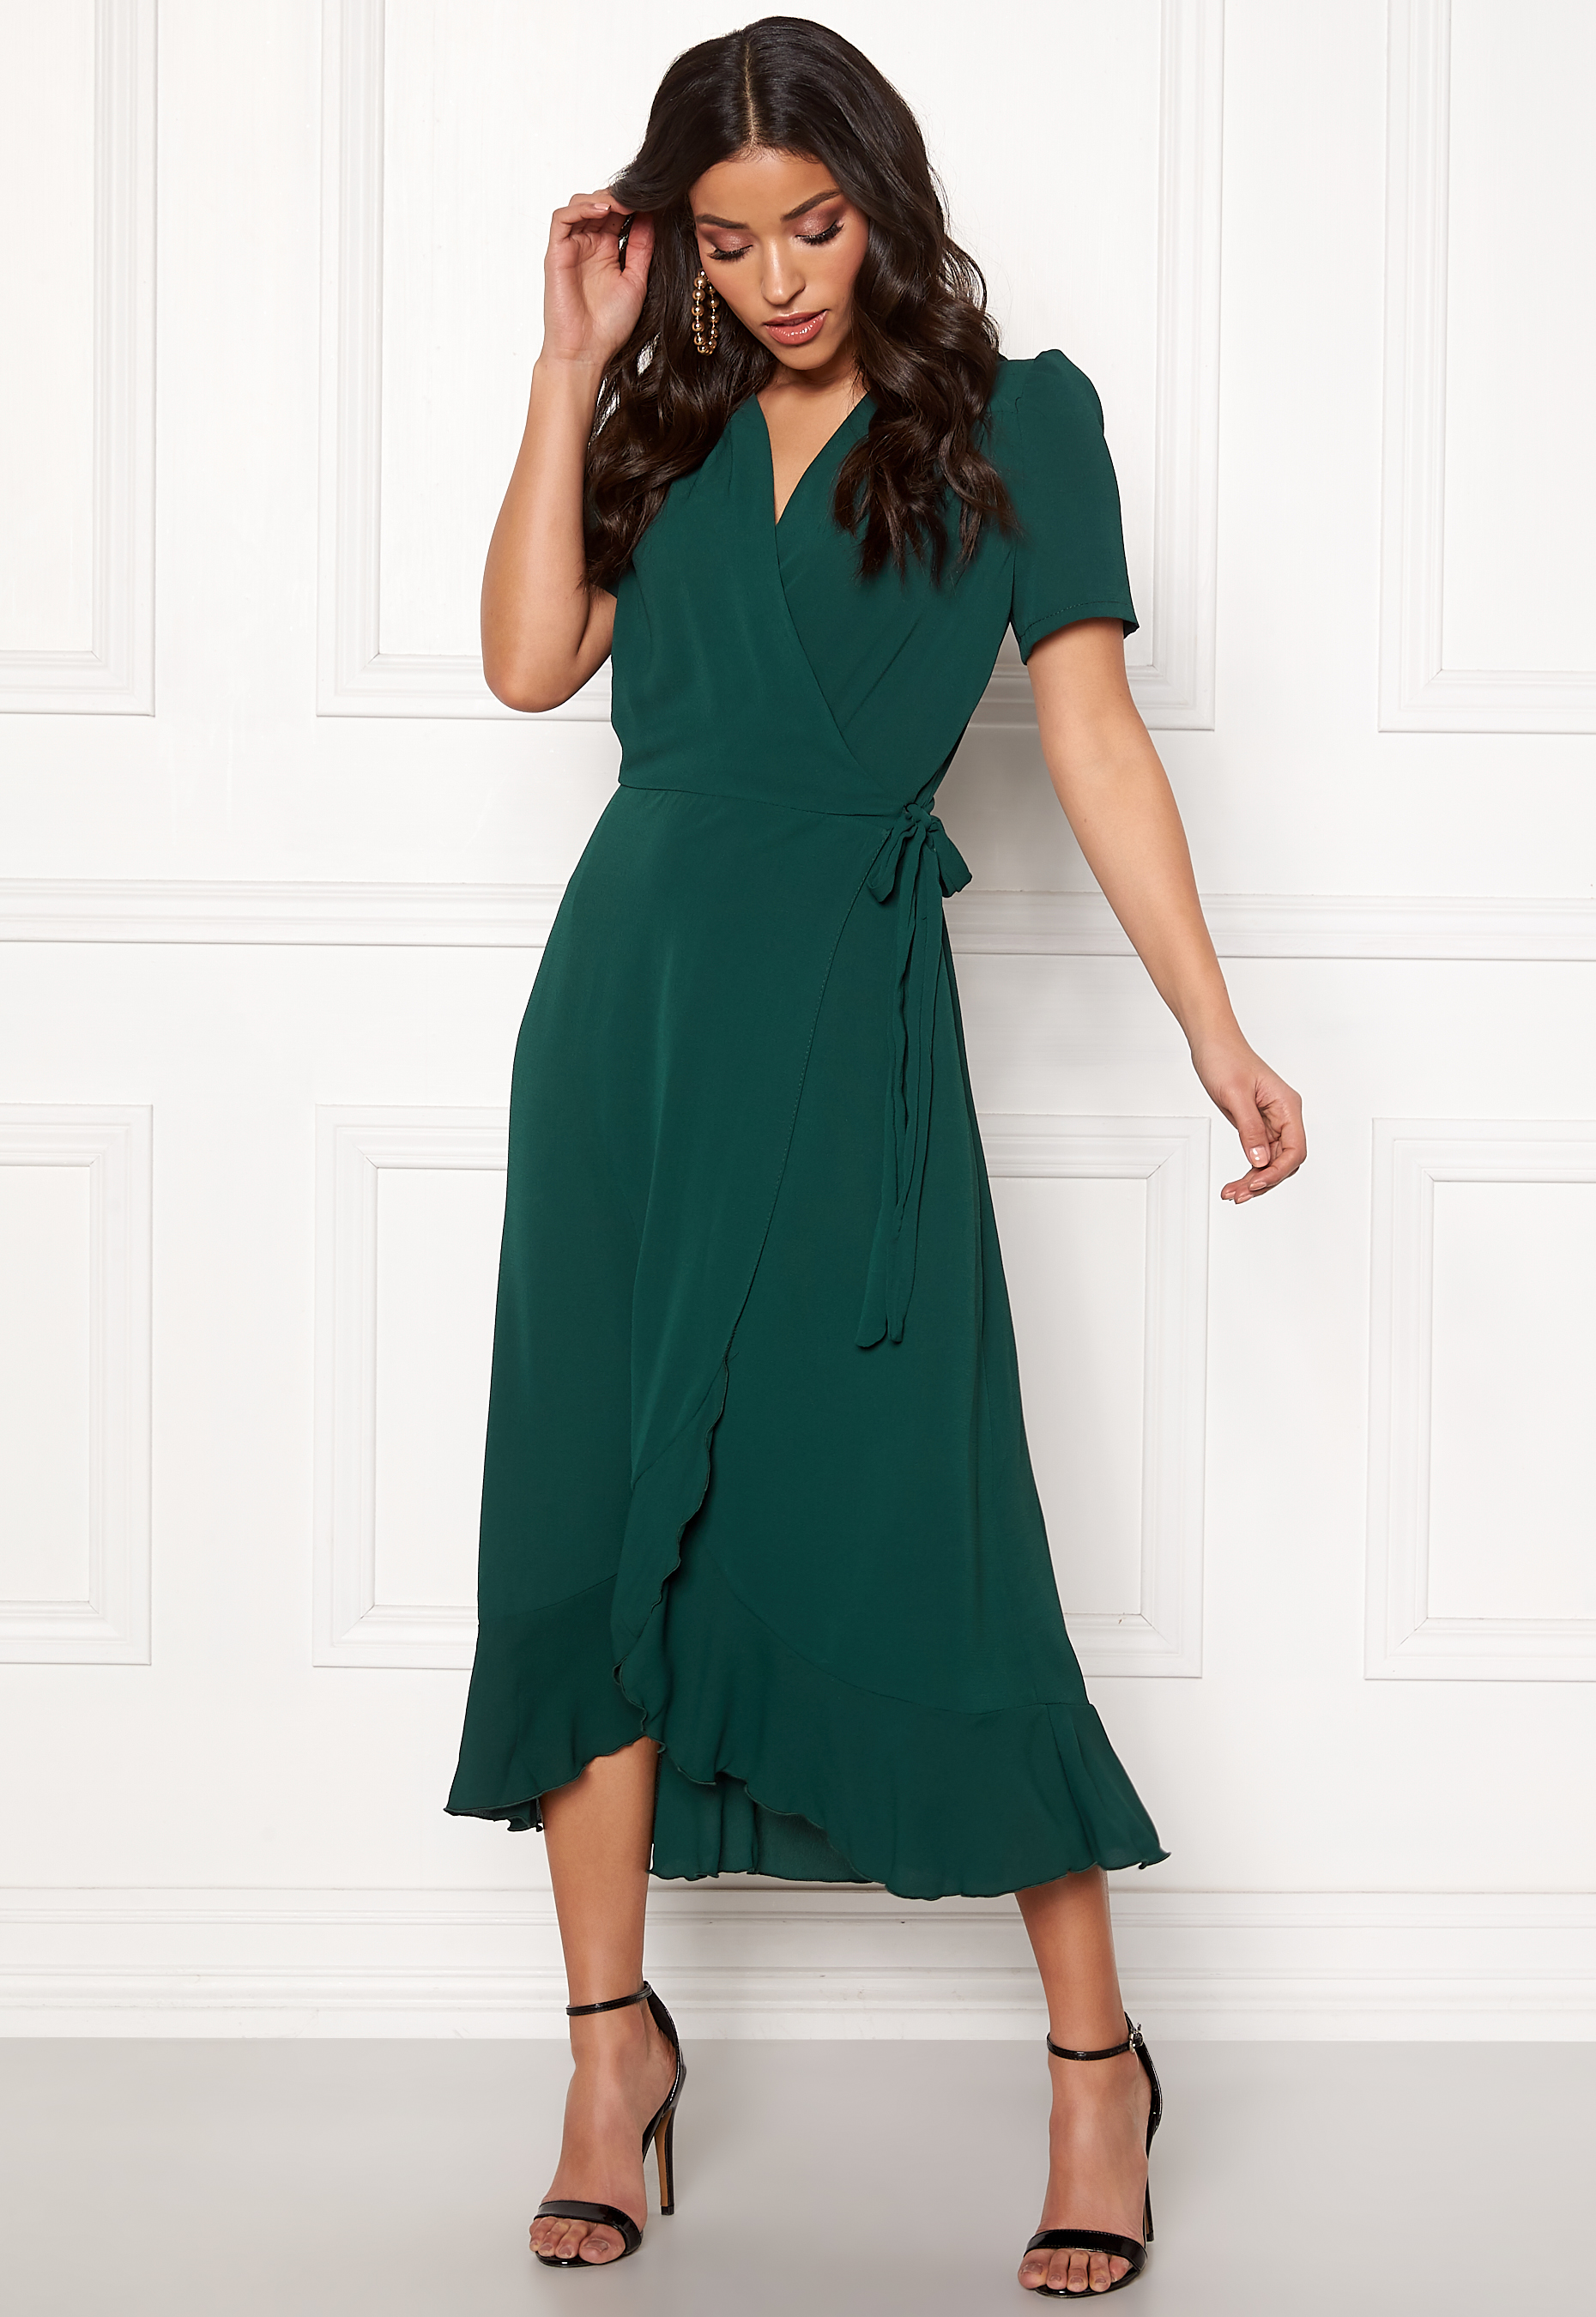 Next Green Wrap Dress Outlet Shop, UP TO 60% OFF | www.aramanatural.es